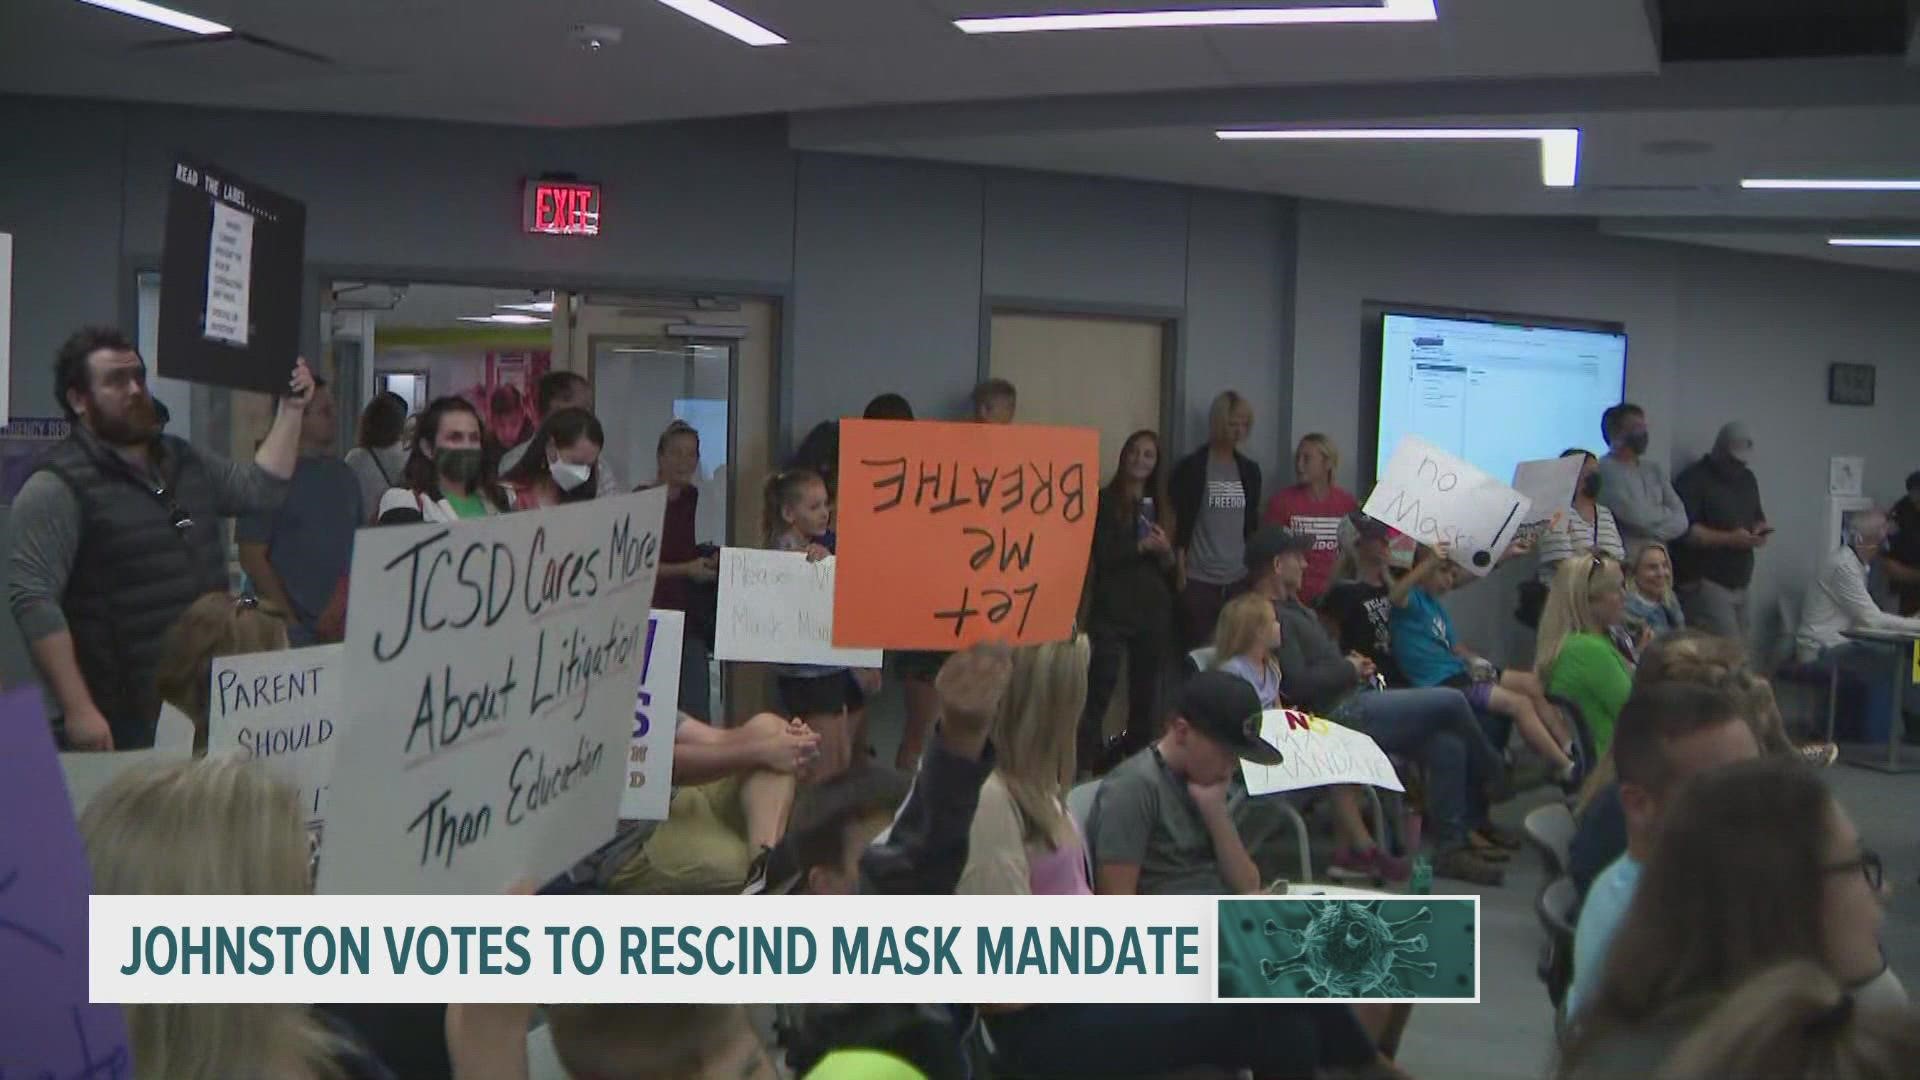 The school board voted 4-3 Tuesday night in favor of lifting the mask mandate that had been reinstated in September.